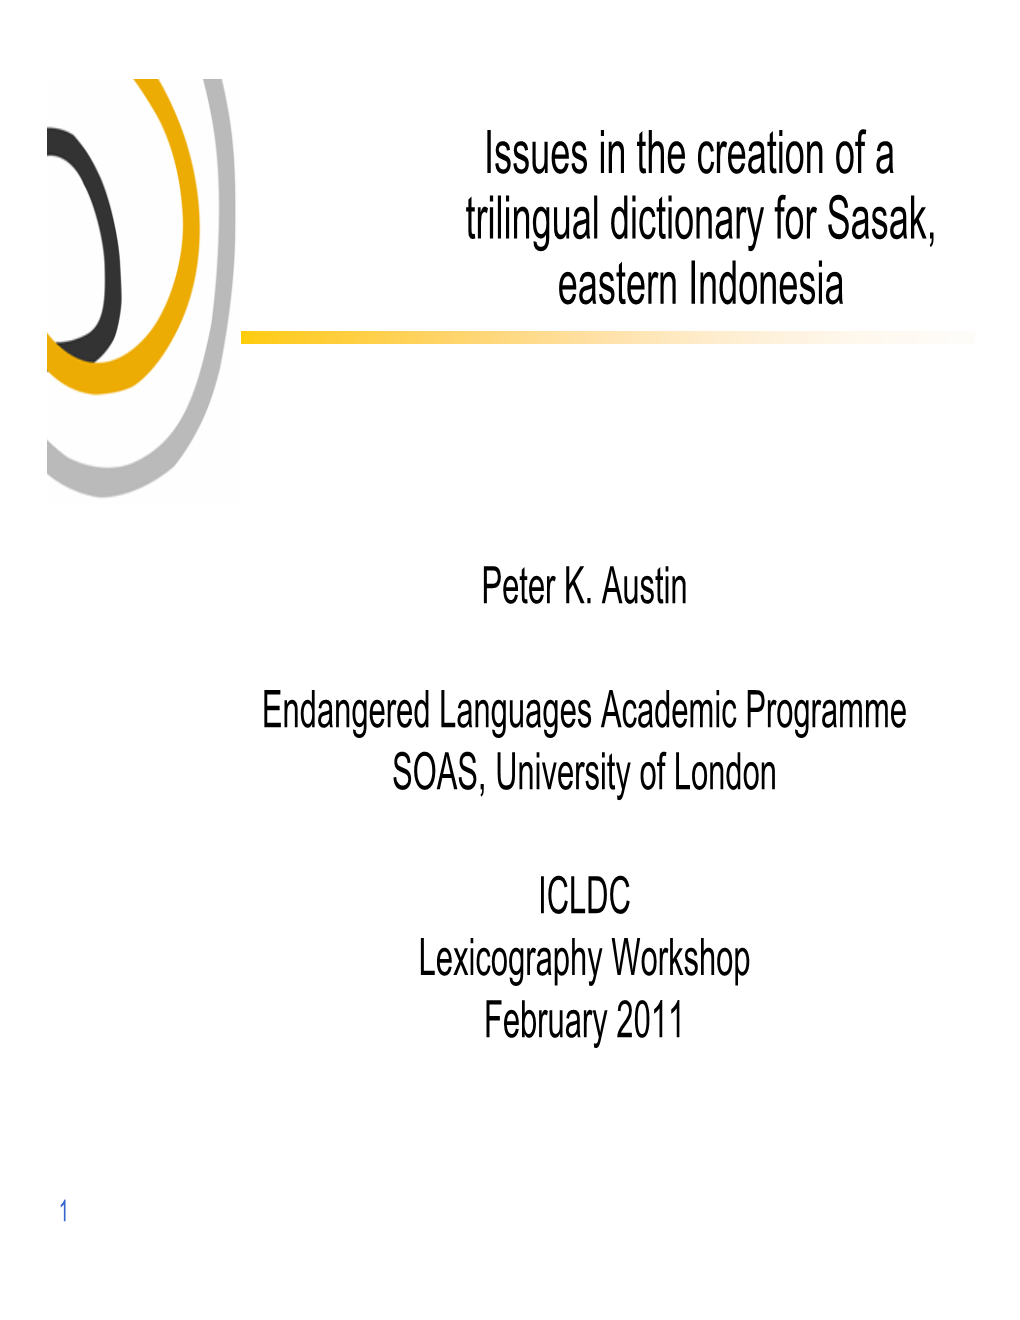 Issues in the Creation of a Trilingual Dictionary for Sasak, Eastern Indonesia